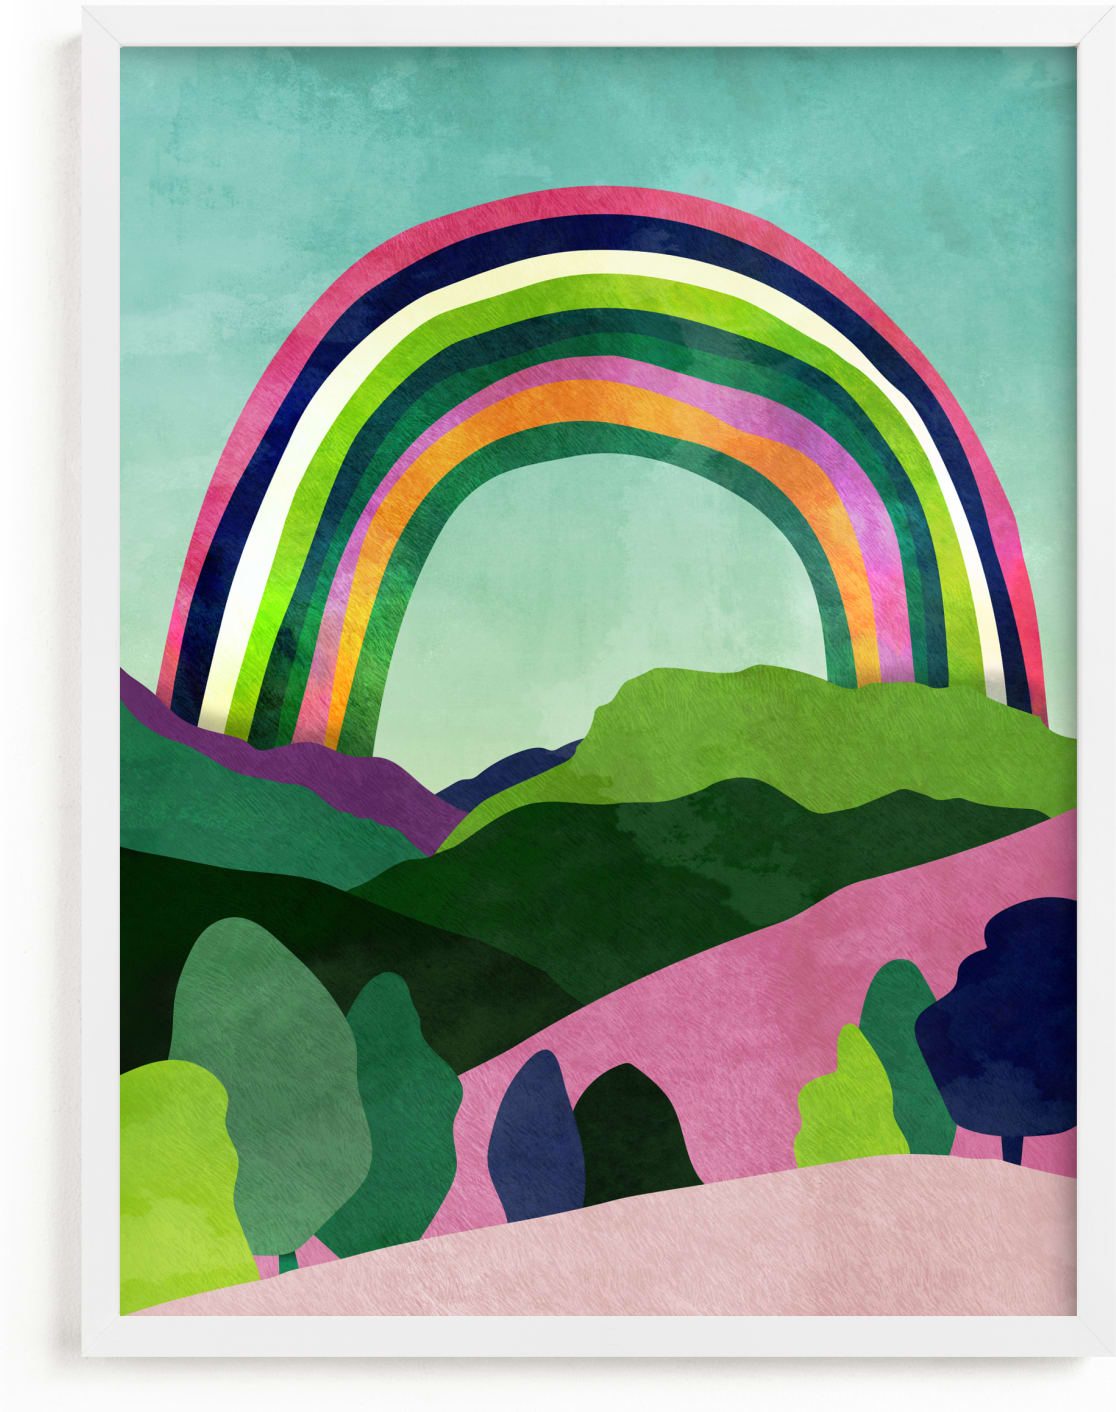 This is a colorful kids wall art by Mojca Dolinar called Rainbow dreams.